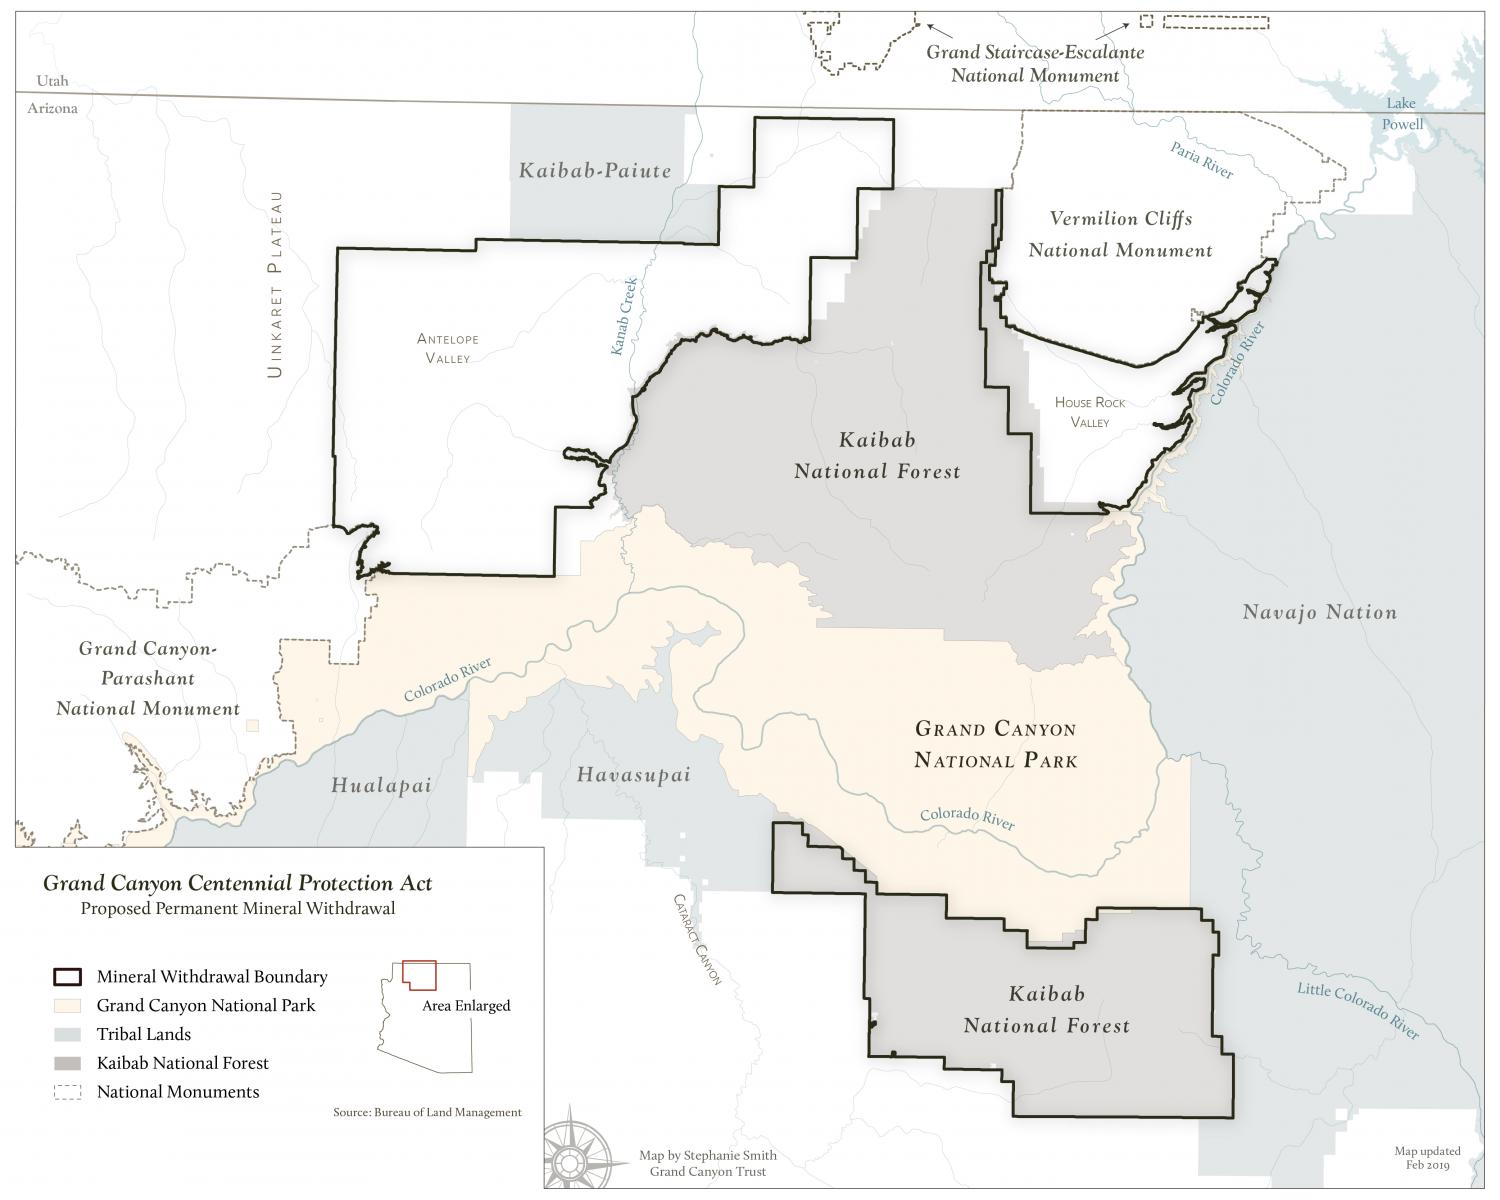 The Grand Canyon Protection Act 